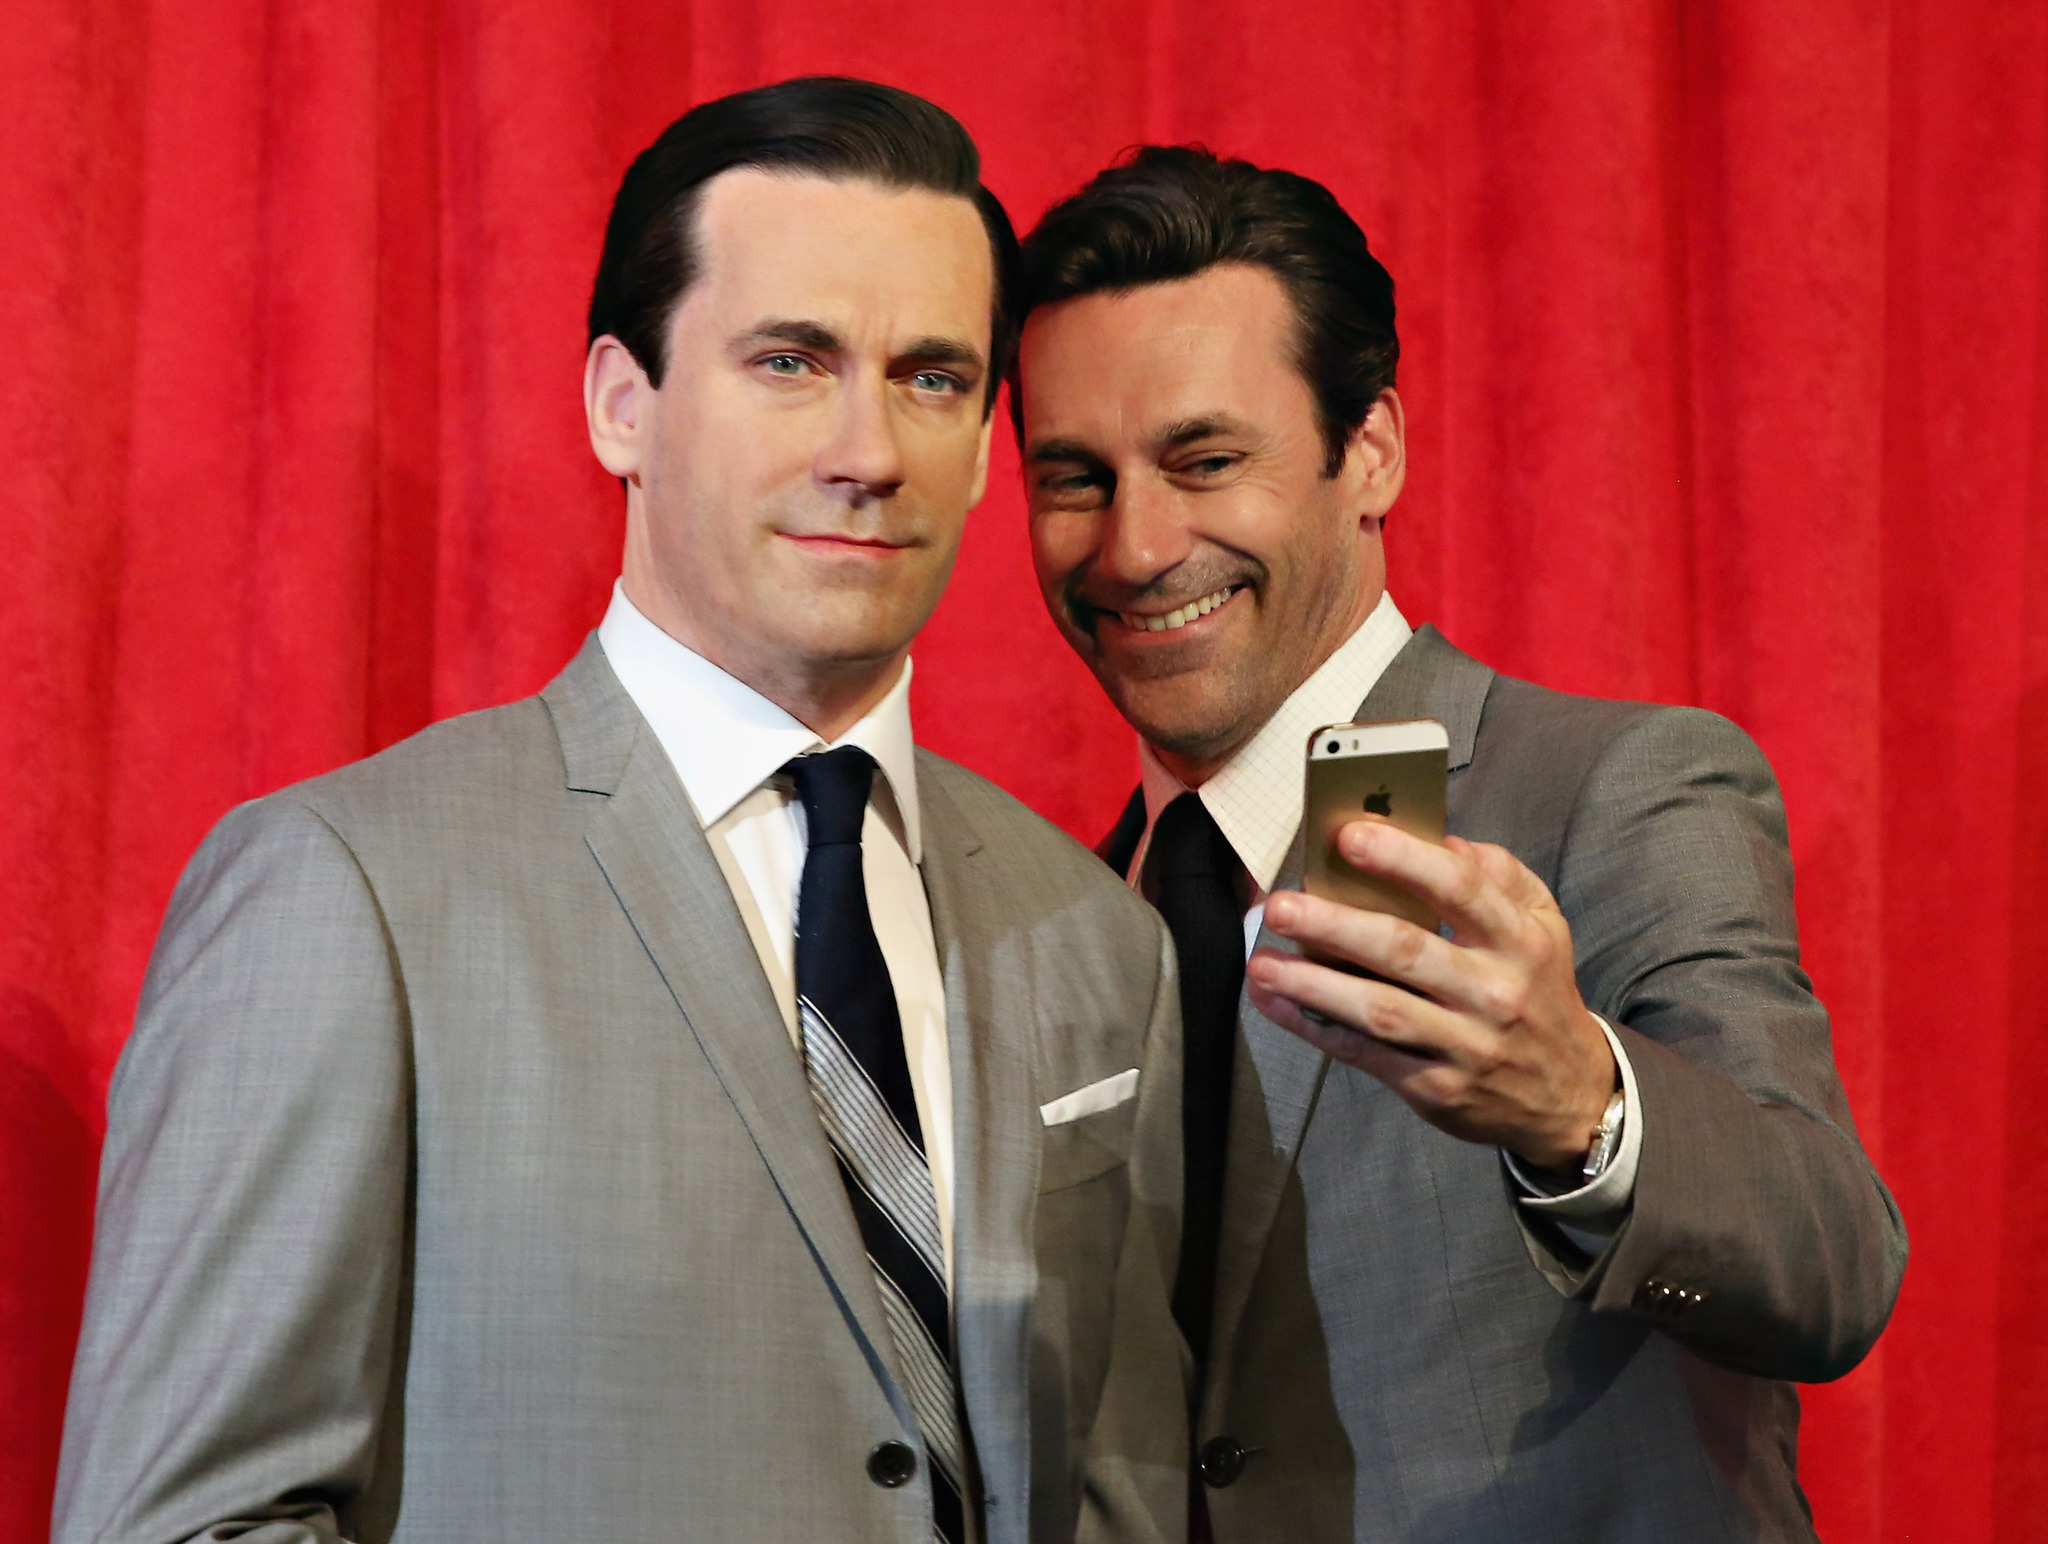 Actor Jon Hamm takes a selfie as he unveils Don Draper's wax figure during Mad Men's Final Season at Madame Tussauds New York on May 9, 2014 in New York City.